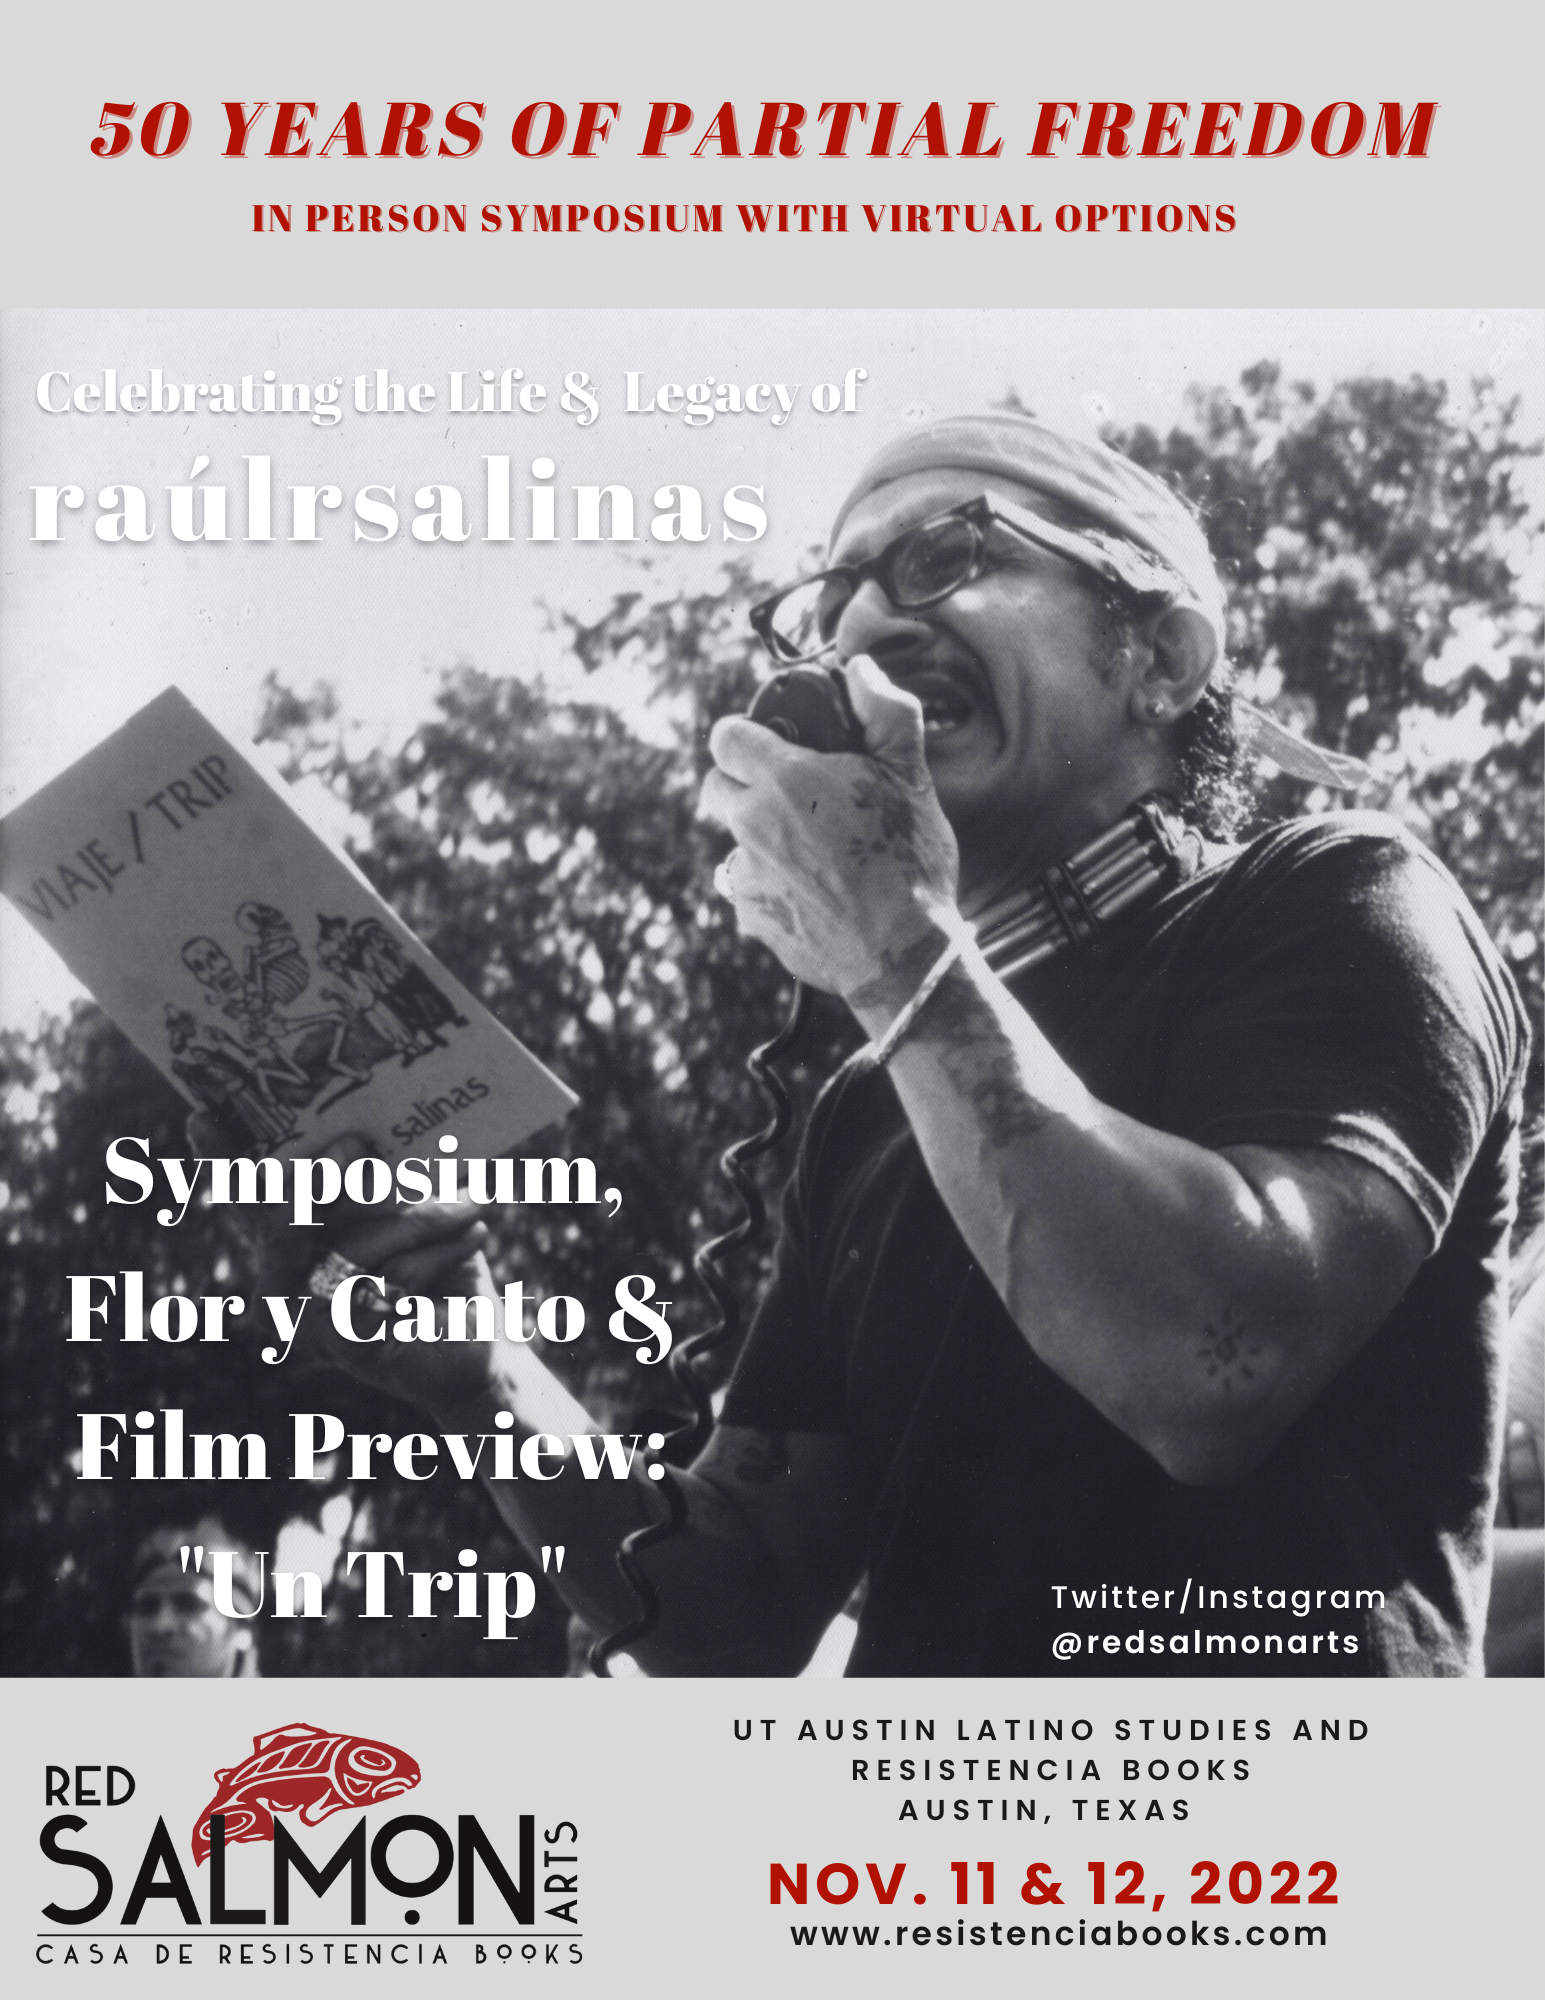 You are currently viewing “Un Trip” Preview to be screened November 12th at Resistencia Books for the 50 Years of Partial Freedom Symposium 7pm